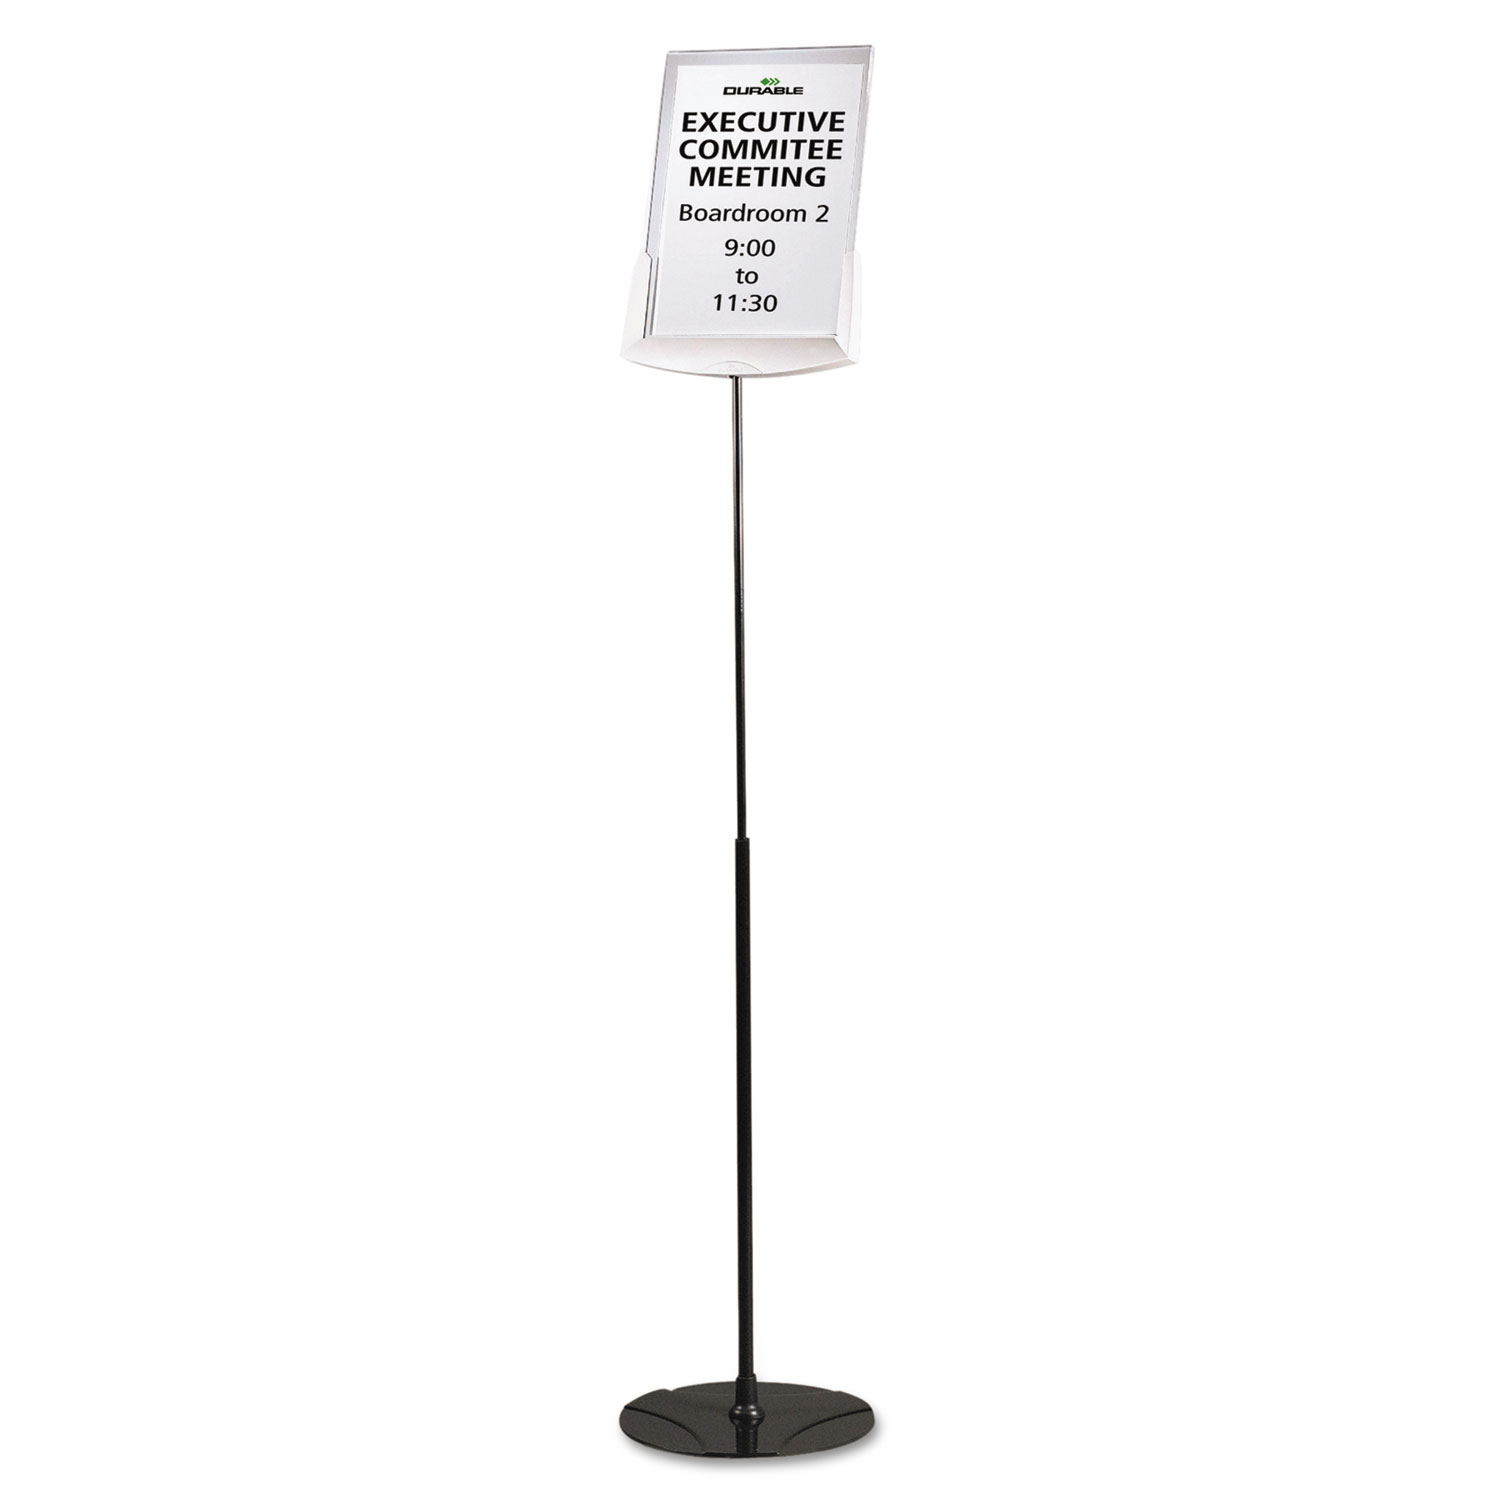  Durable 558957 Sherpa Infobase Sign Stand, Acrylic/Metal, 40-60 High, Gray (DBL558957) 